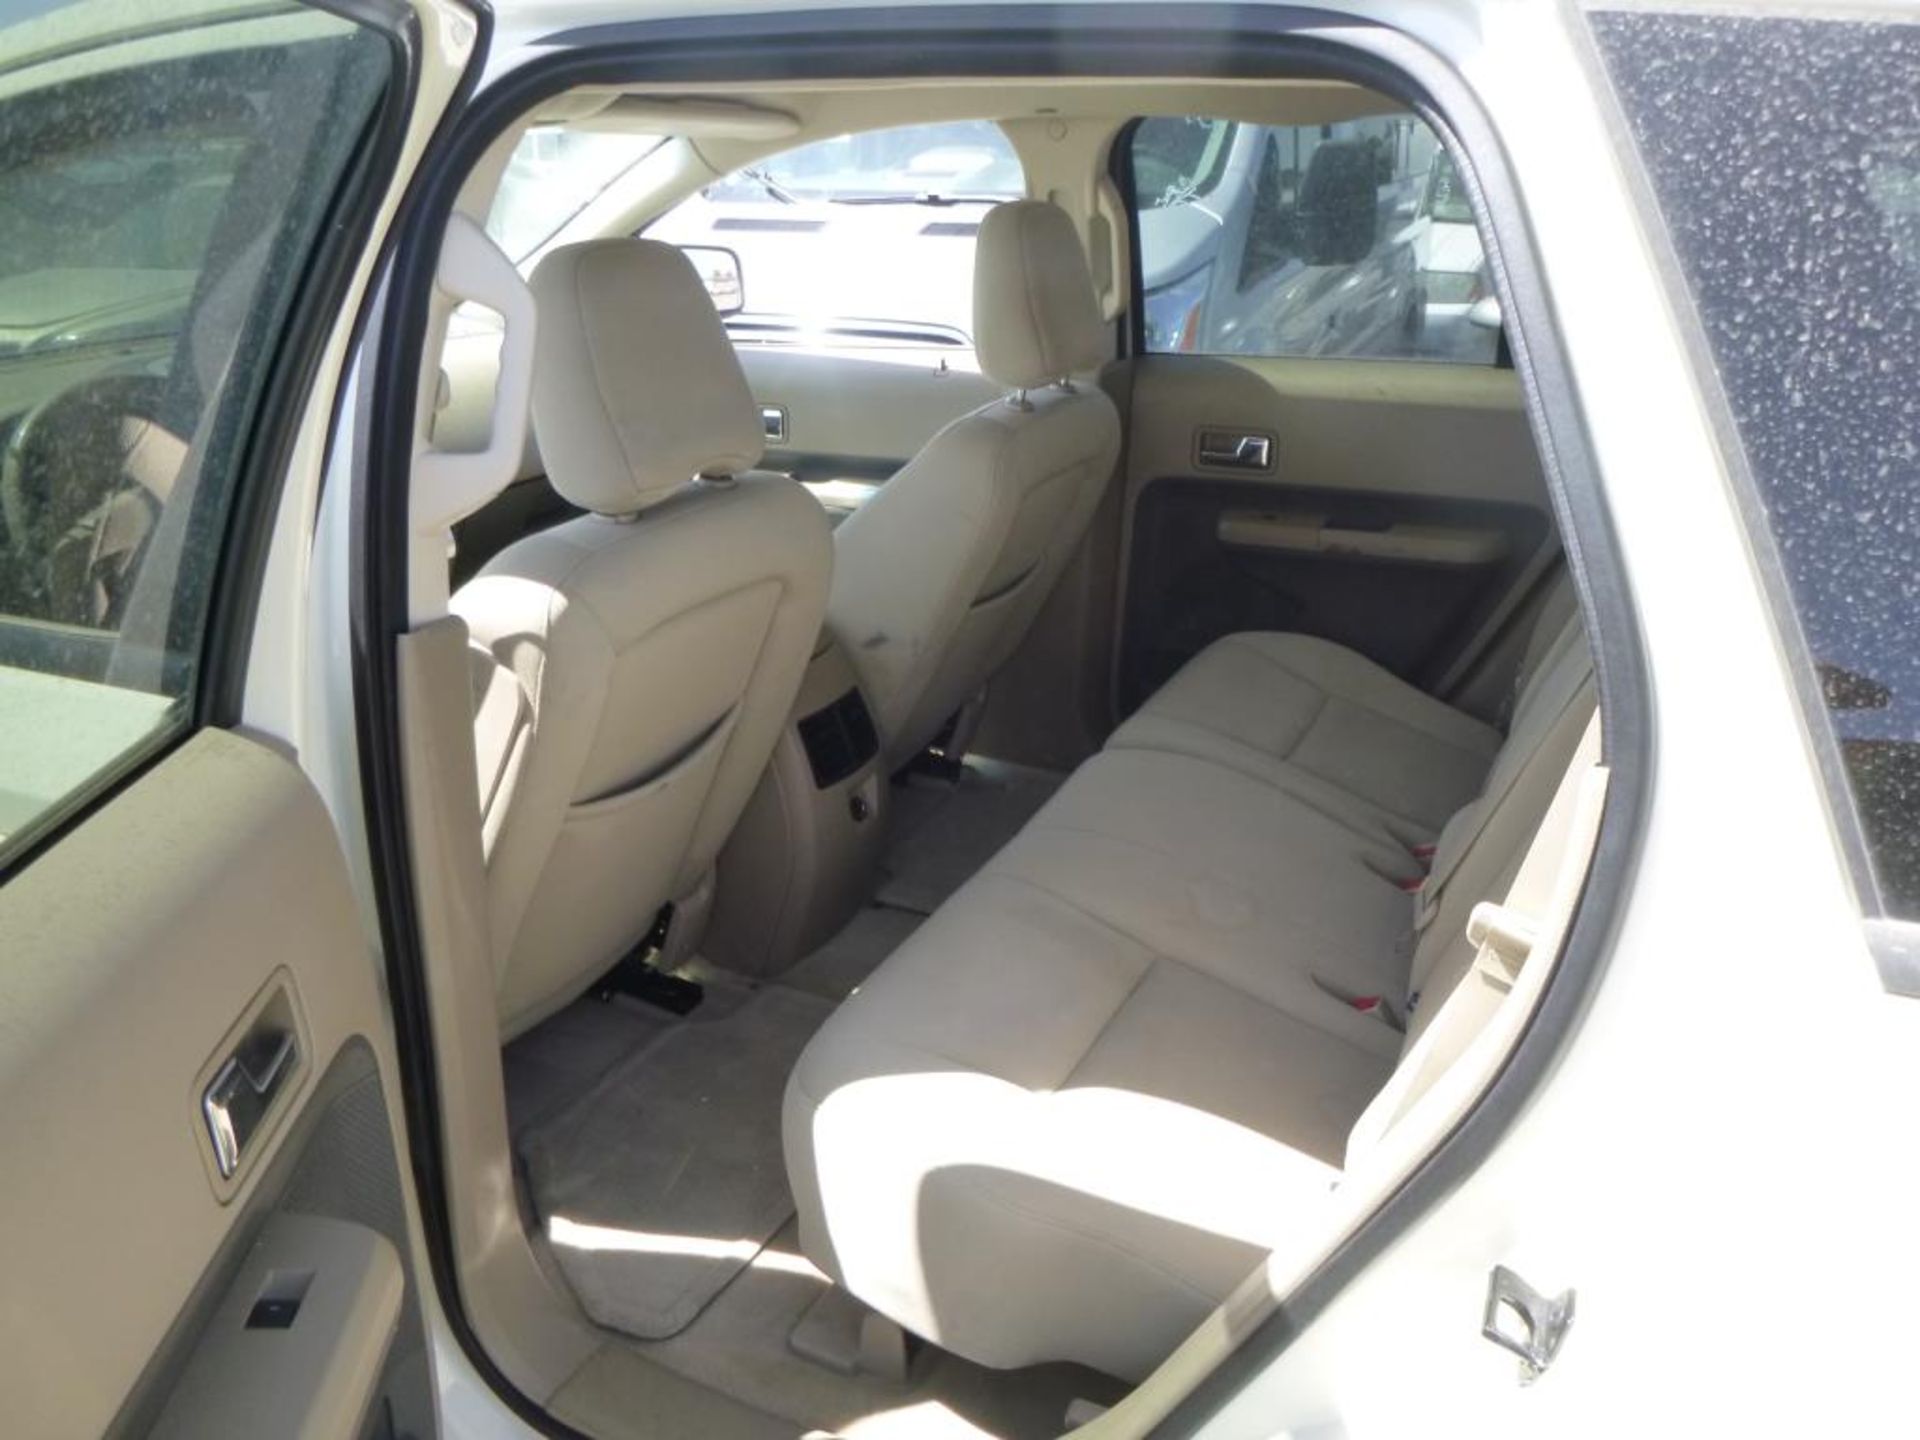 (Lot # 3309) 2007 Ford Edge - Image 9 of 13